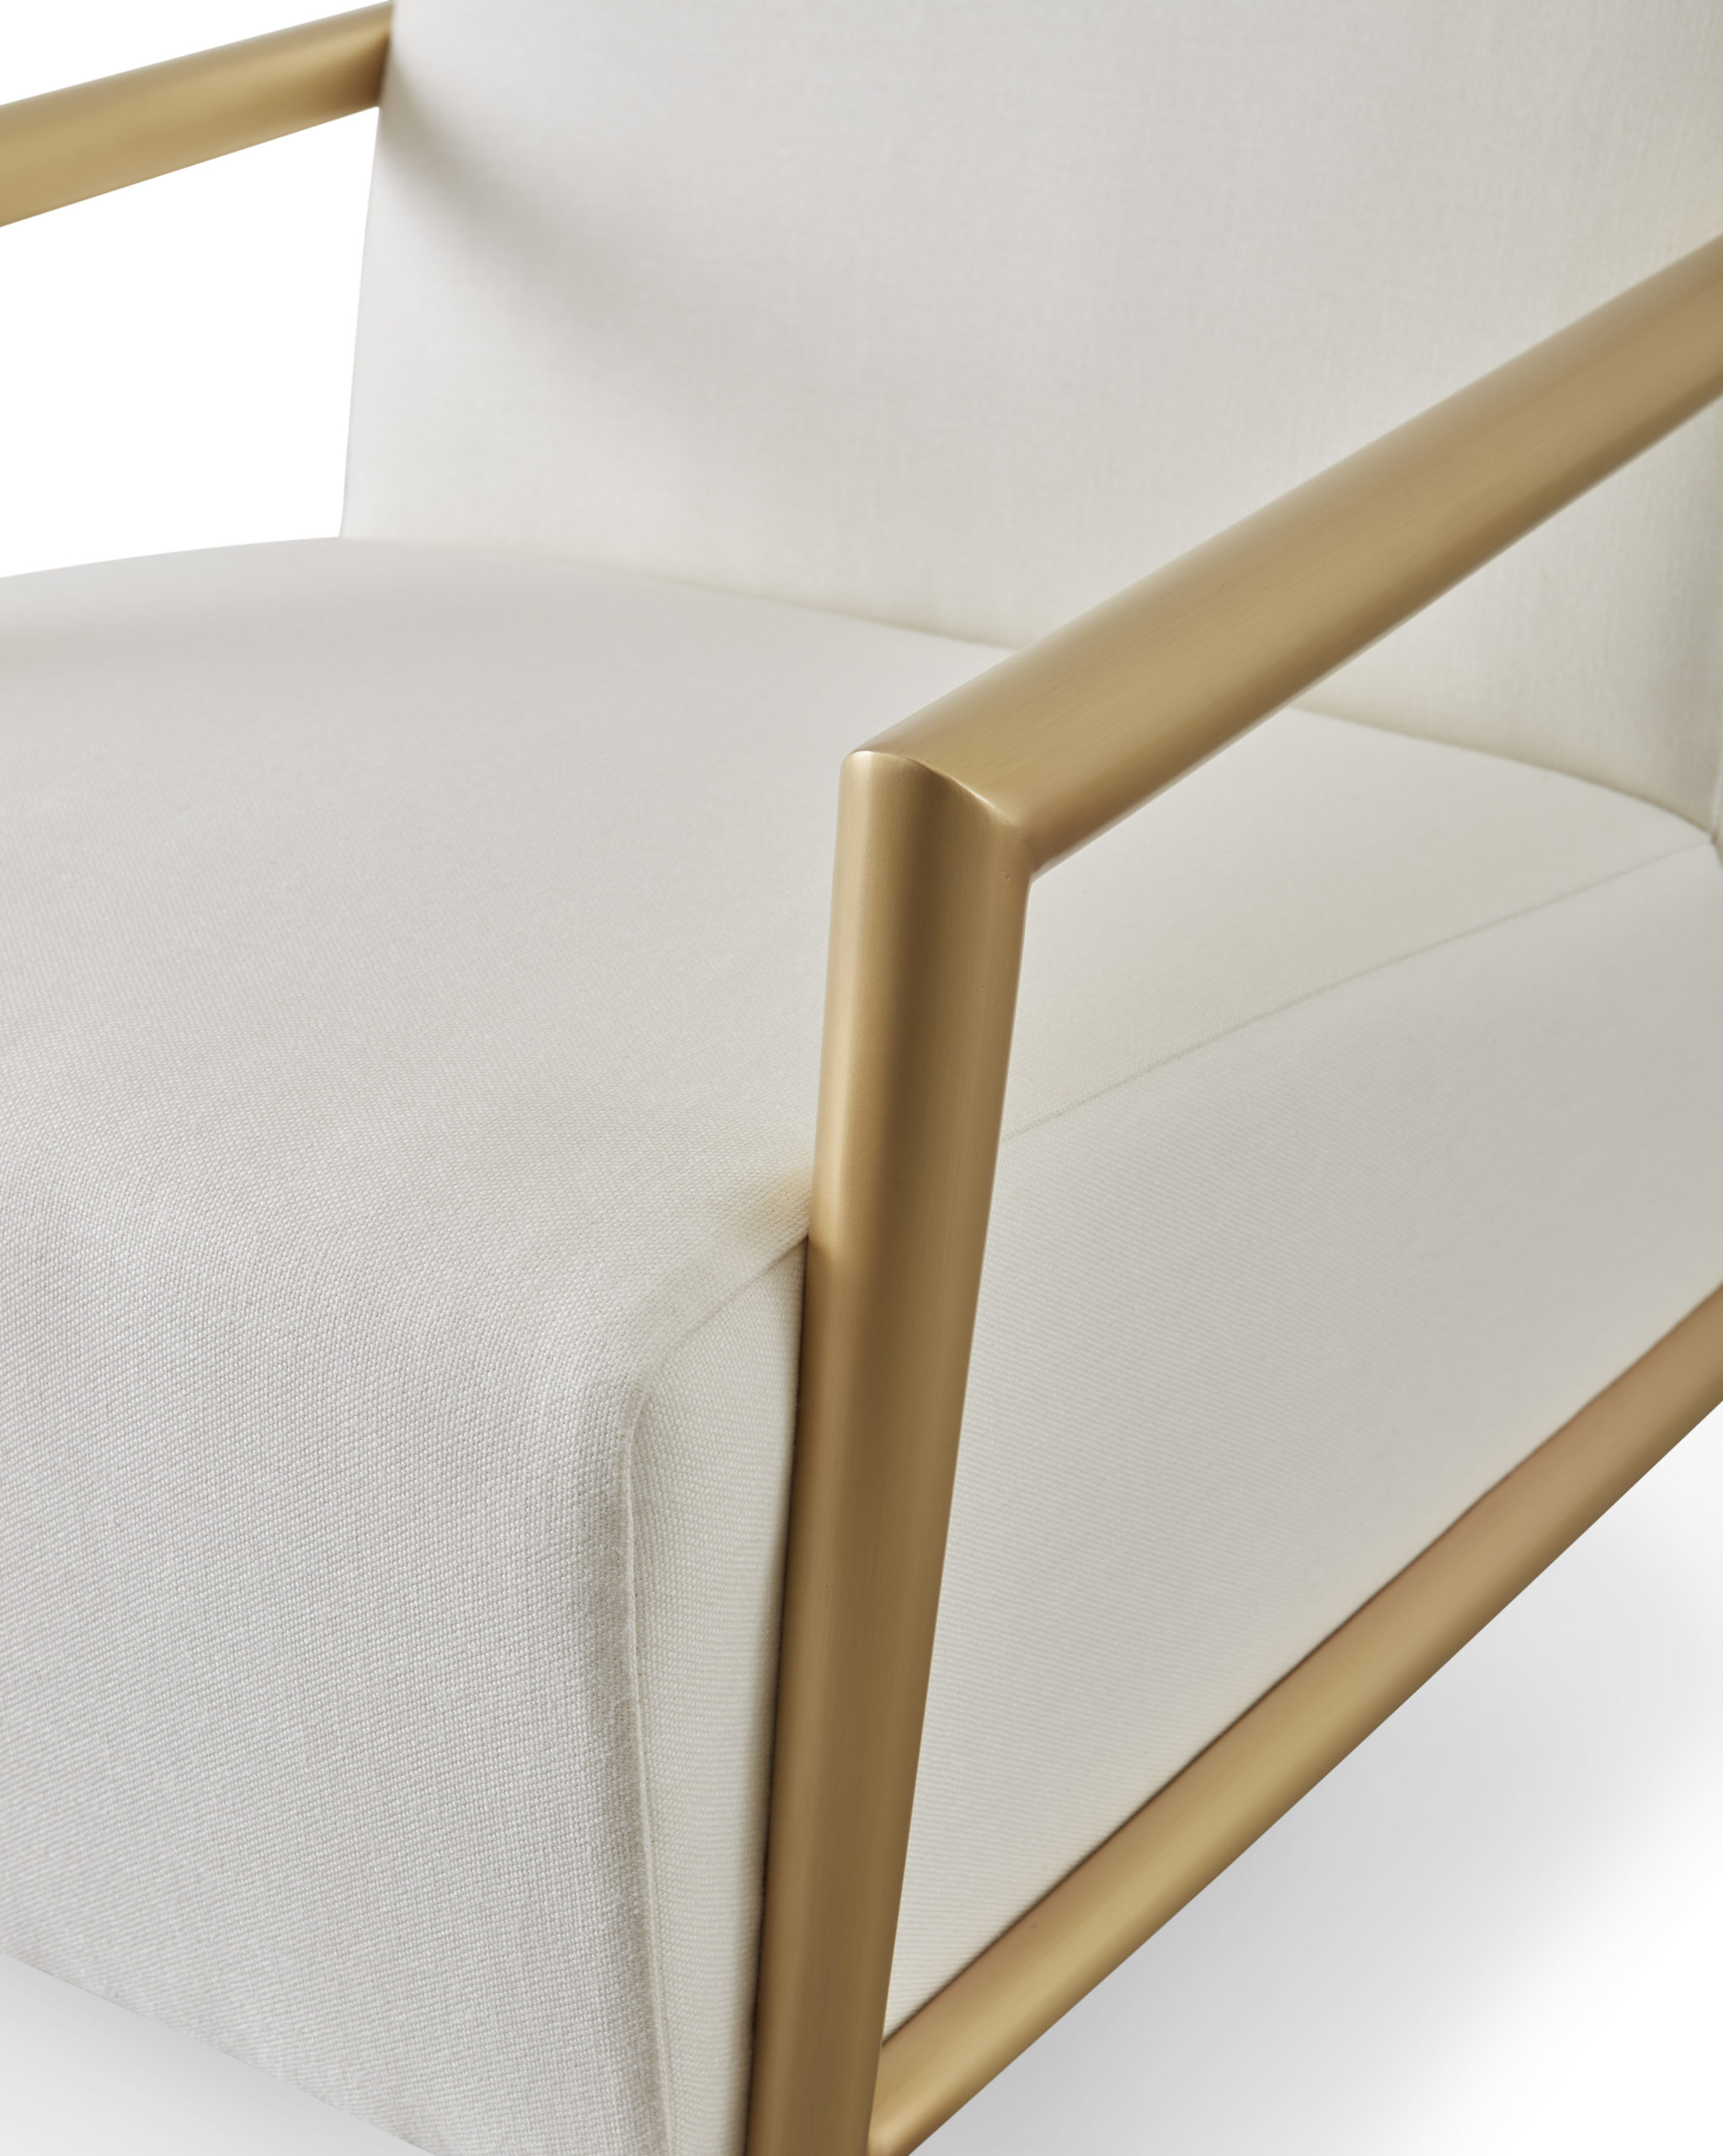 Baker_products_WNWN_enzo_lounge_chair_BAU3104c_DETAIL-scaled-1